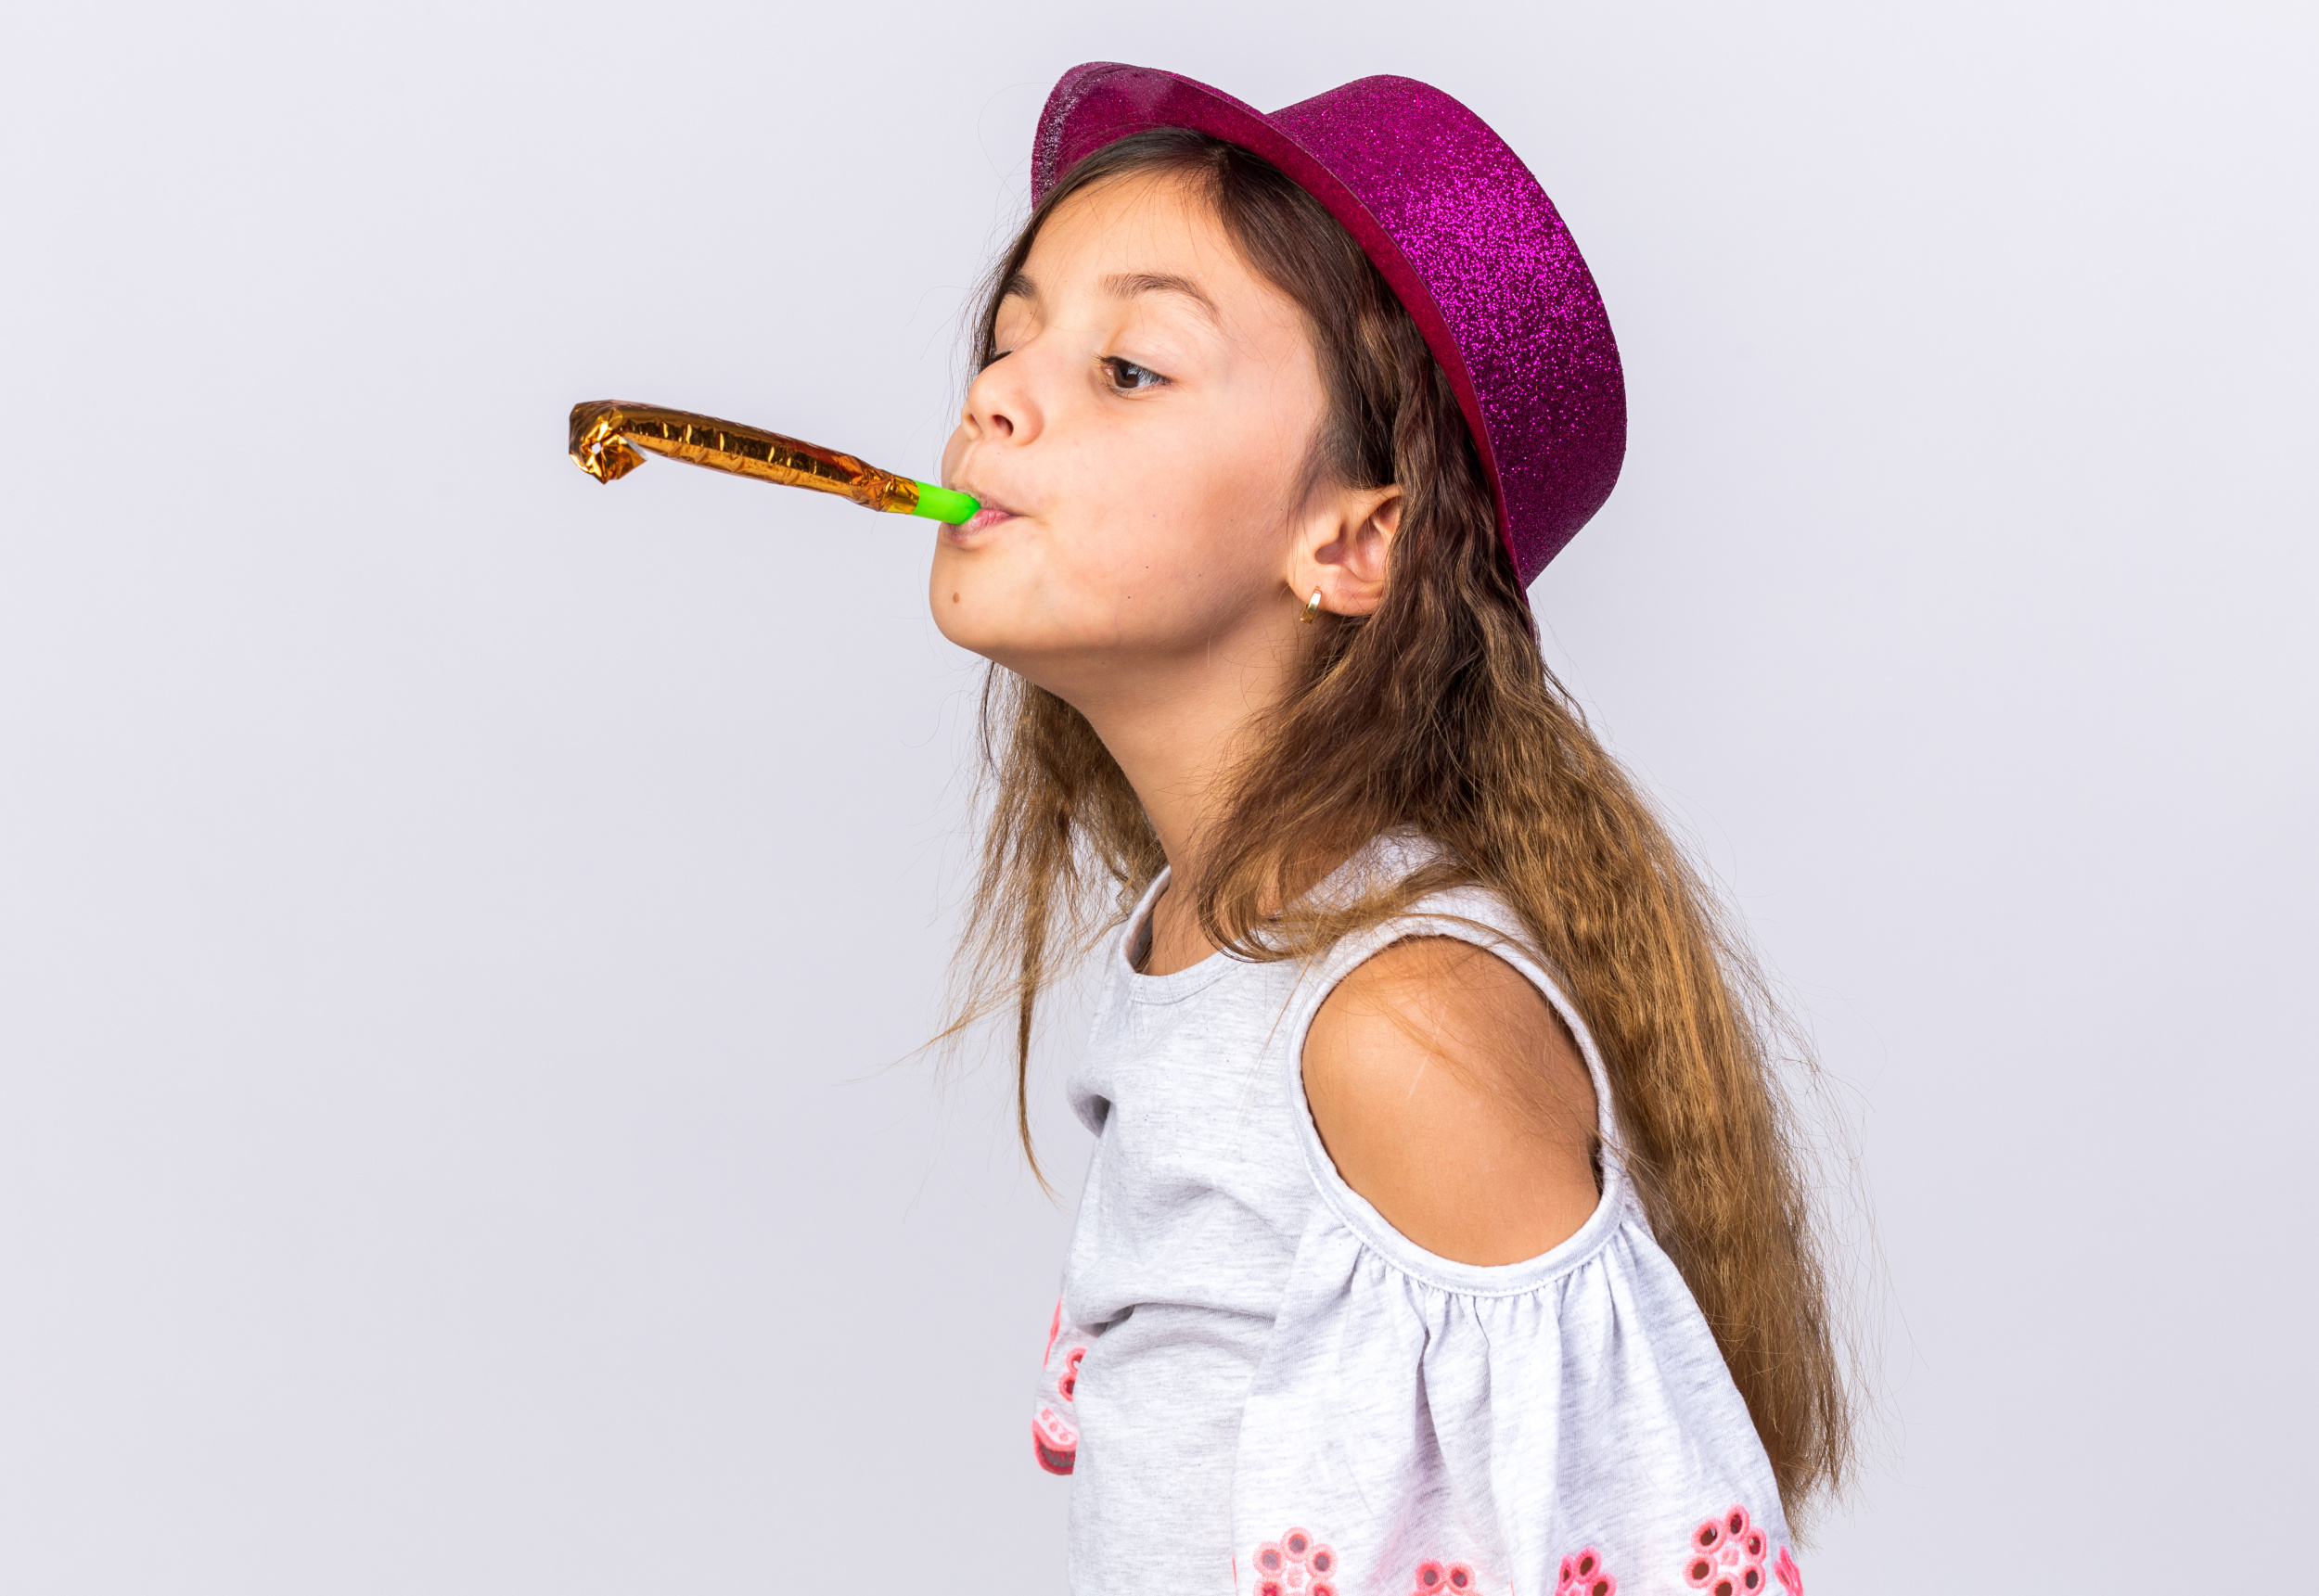 pleased-little-caucasian-girl-with-purple-party-hat-blowing-party-whistle-looking-at-side-isolated-on-white-wall-with-copy-space.jpg